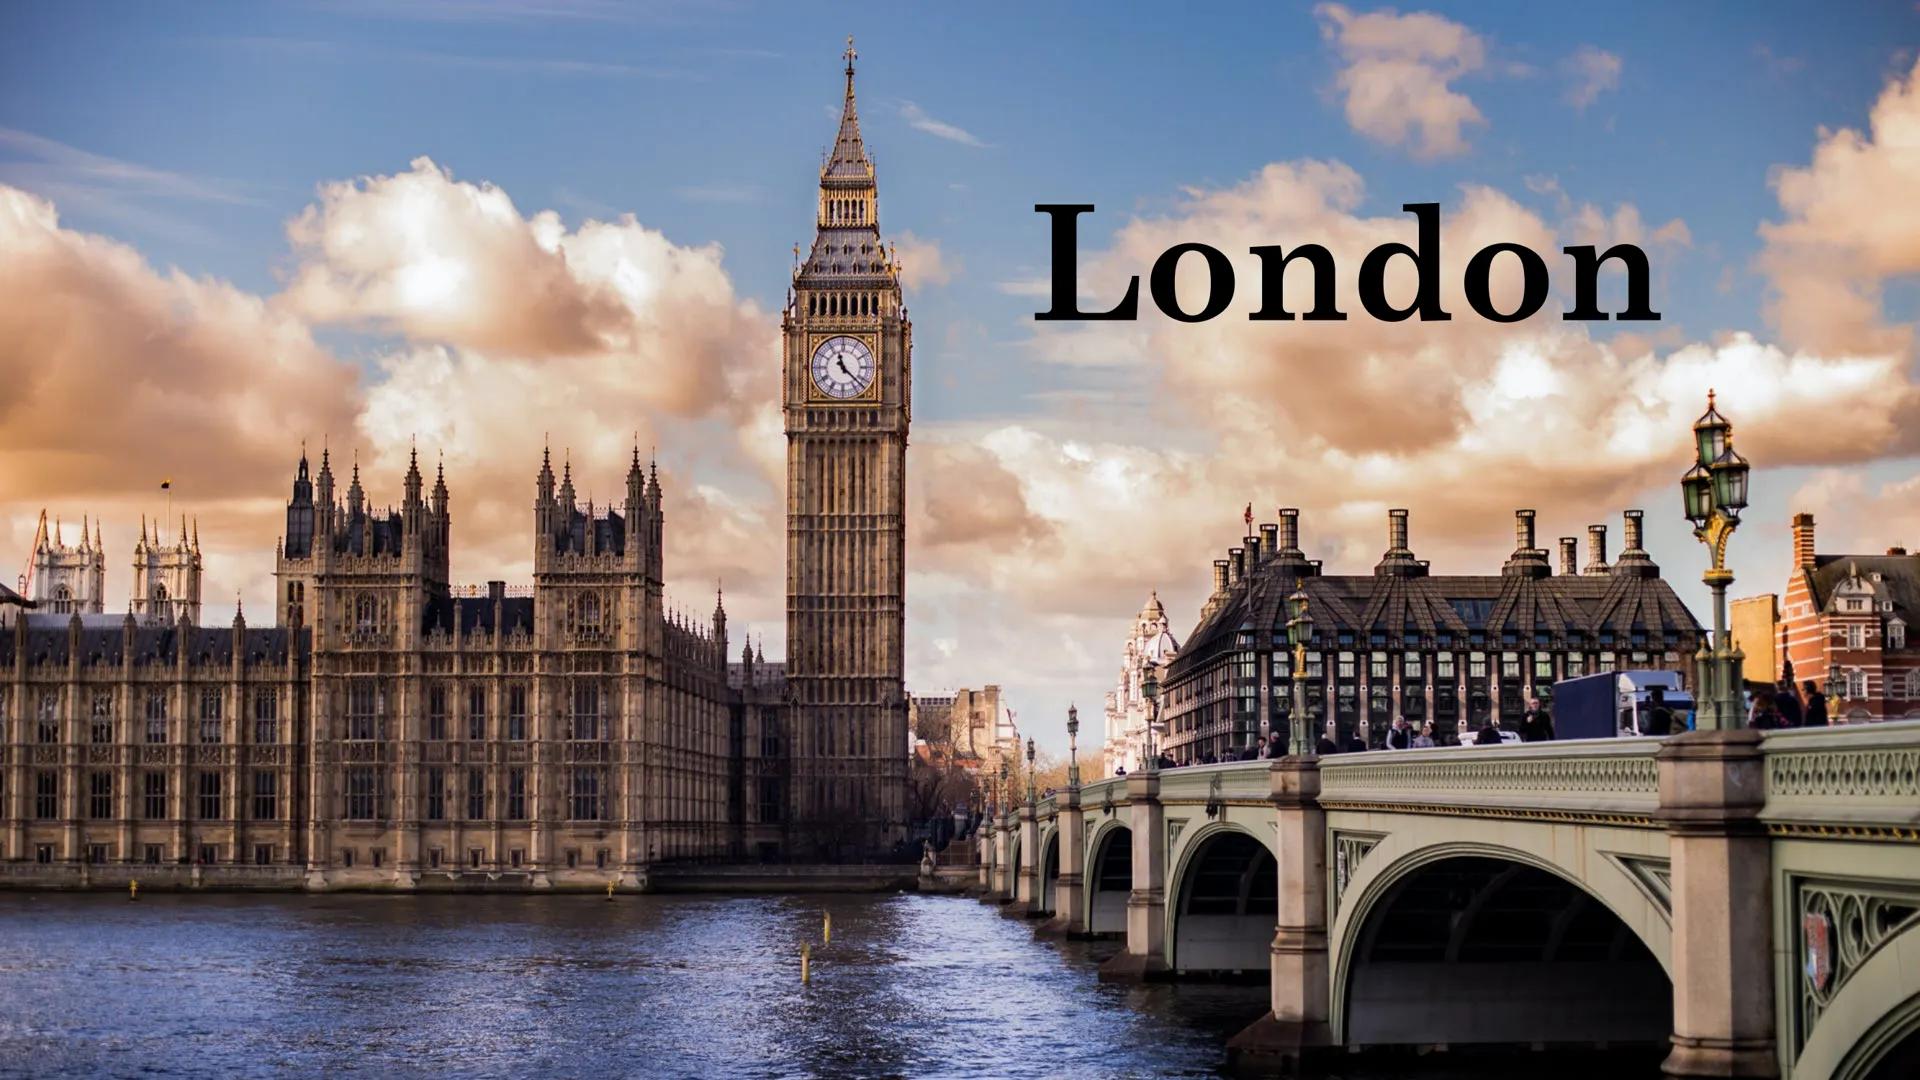 Englisch
Facts:
London is about 2000 years old
32 districts
Country: Great Britain
Part of the country: England
Population: 8.9 million
0.00